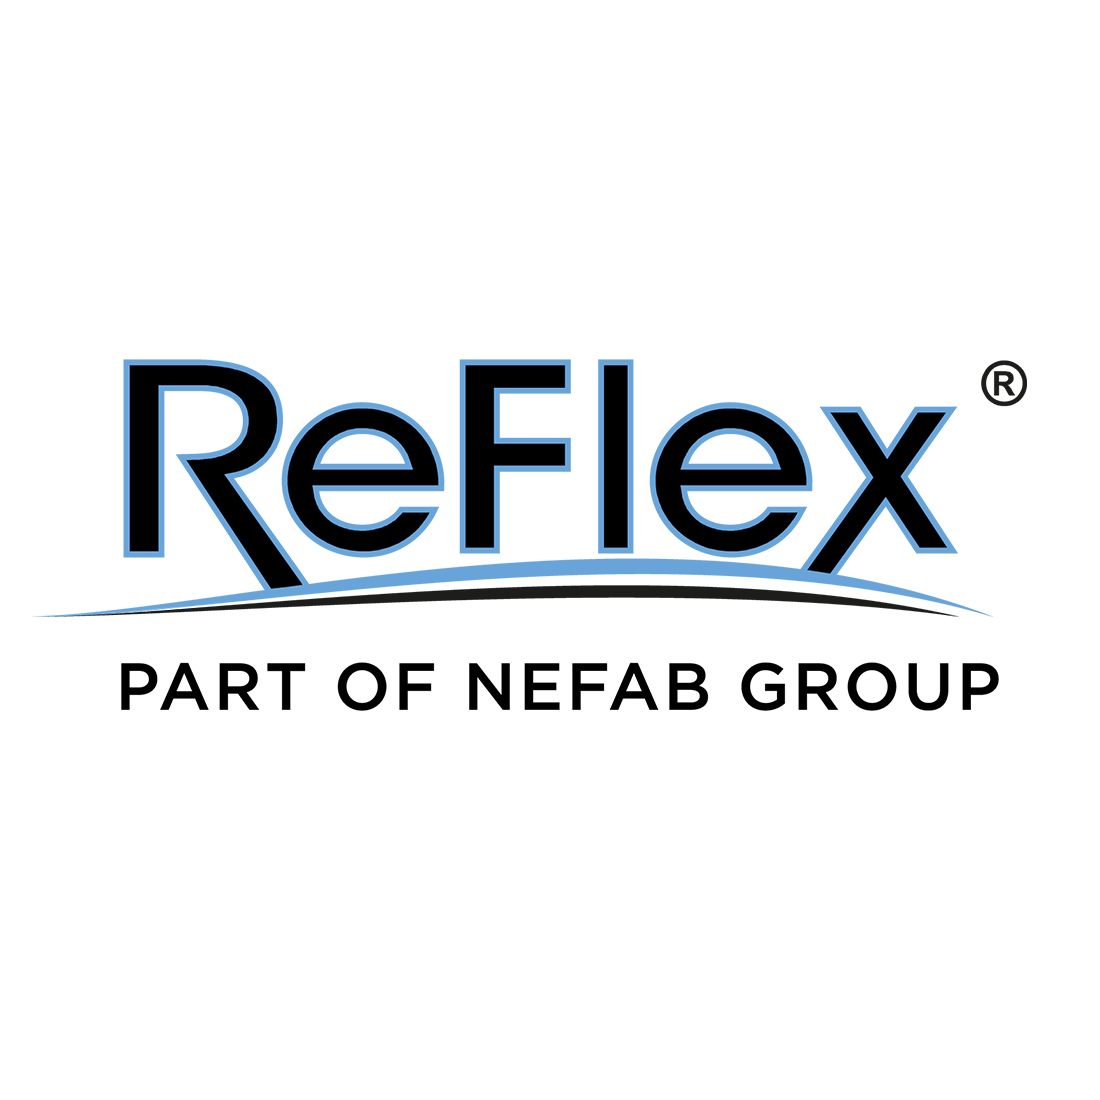 Nefab acquires Reflex Packaging Group